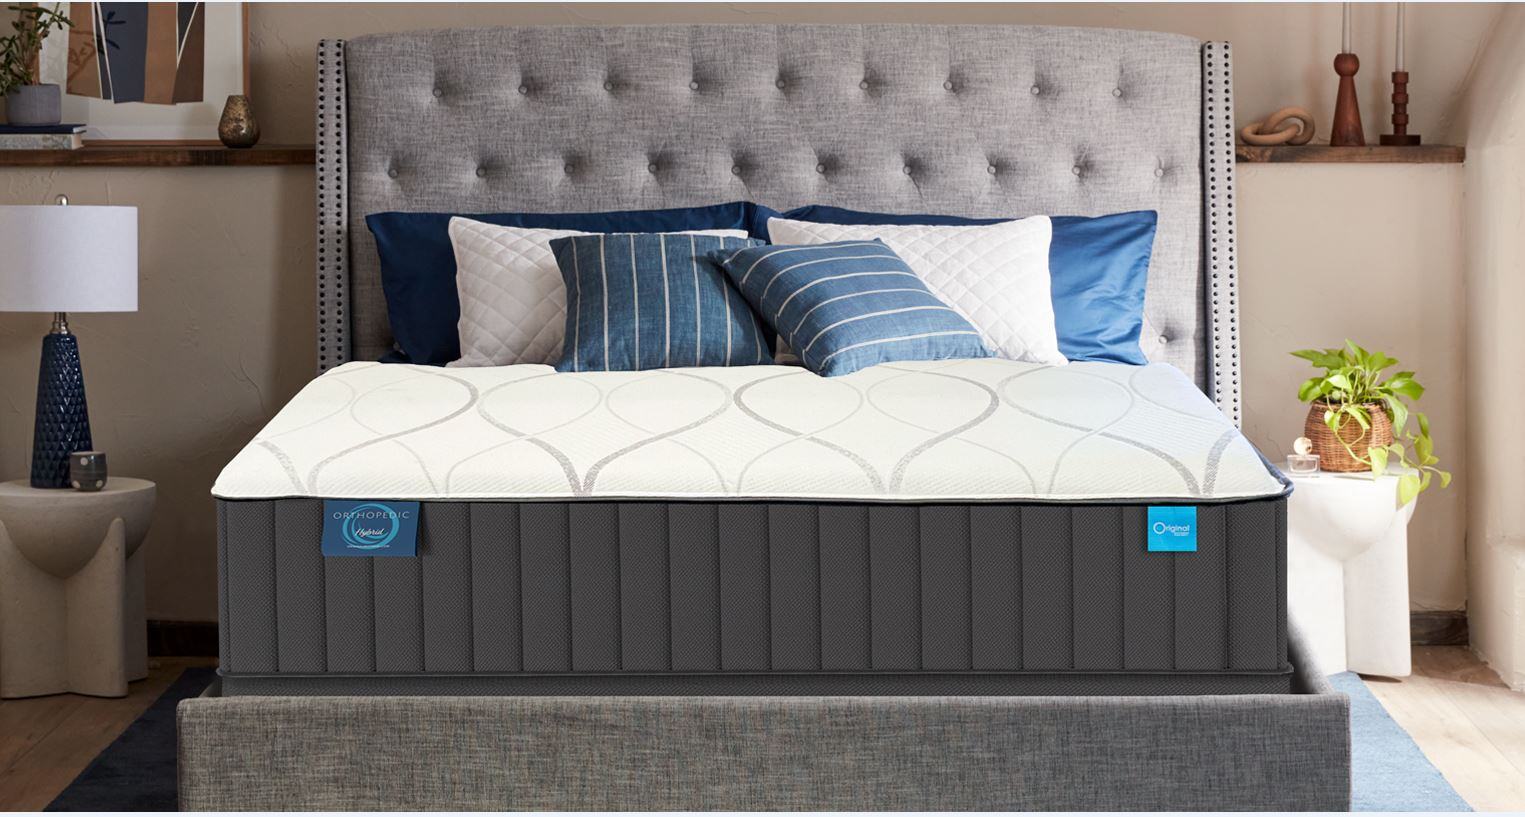 Mattress Myths - Picture of beautifully made bed